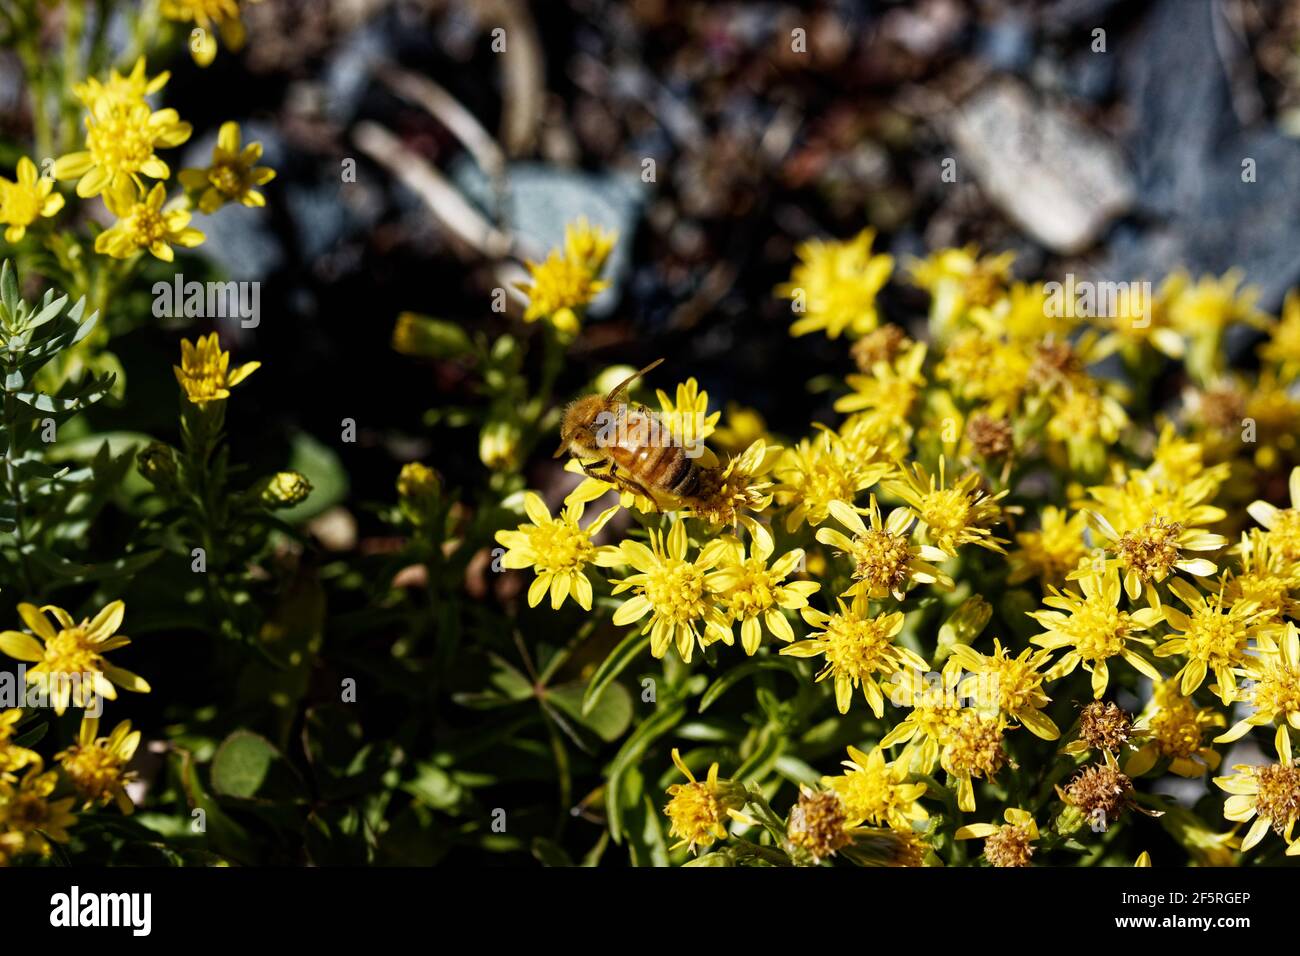 Solidago leiocarpa, common name Cutler's alpine goldenrod, is a plant species native to mountainous portions of Québec, New England, and New York. Stock Photo